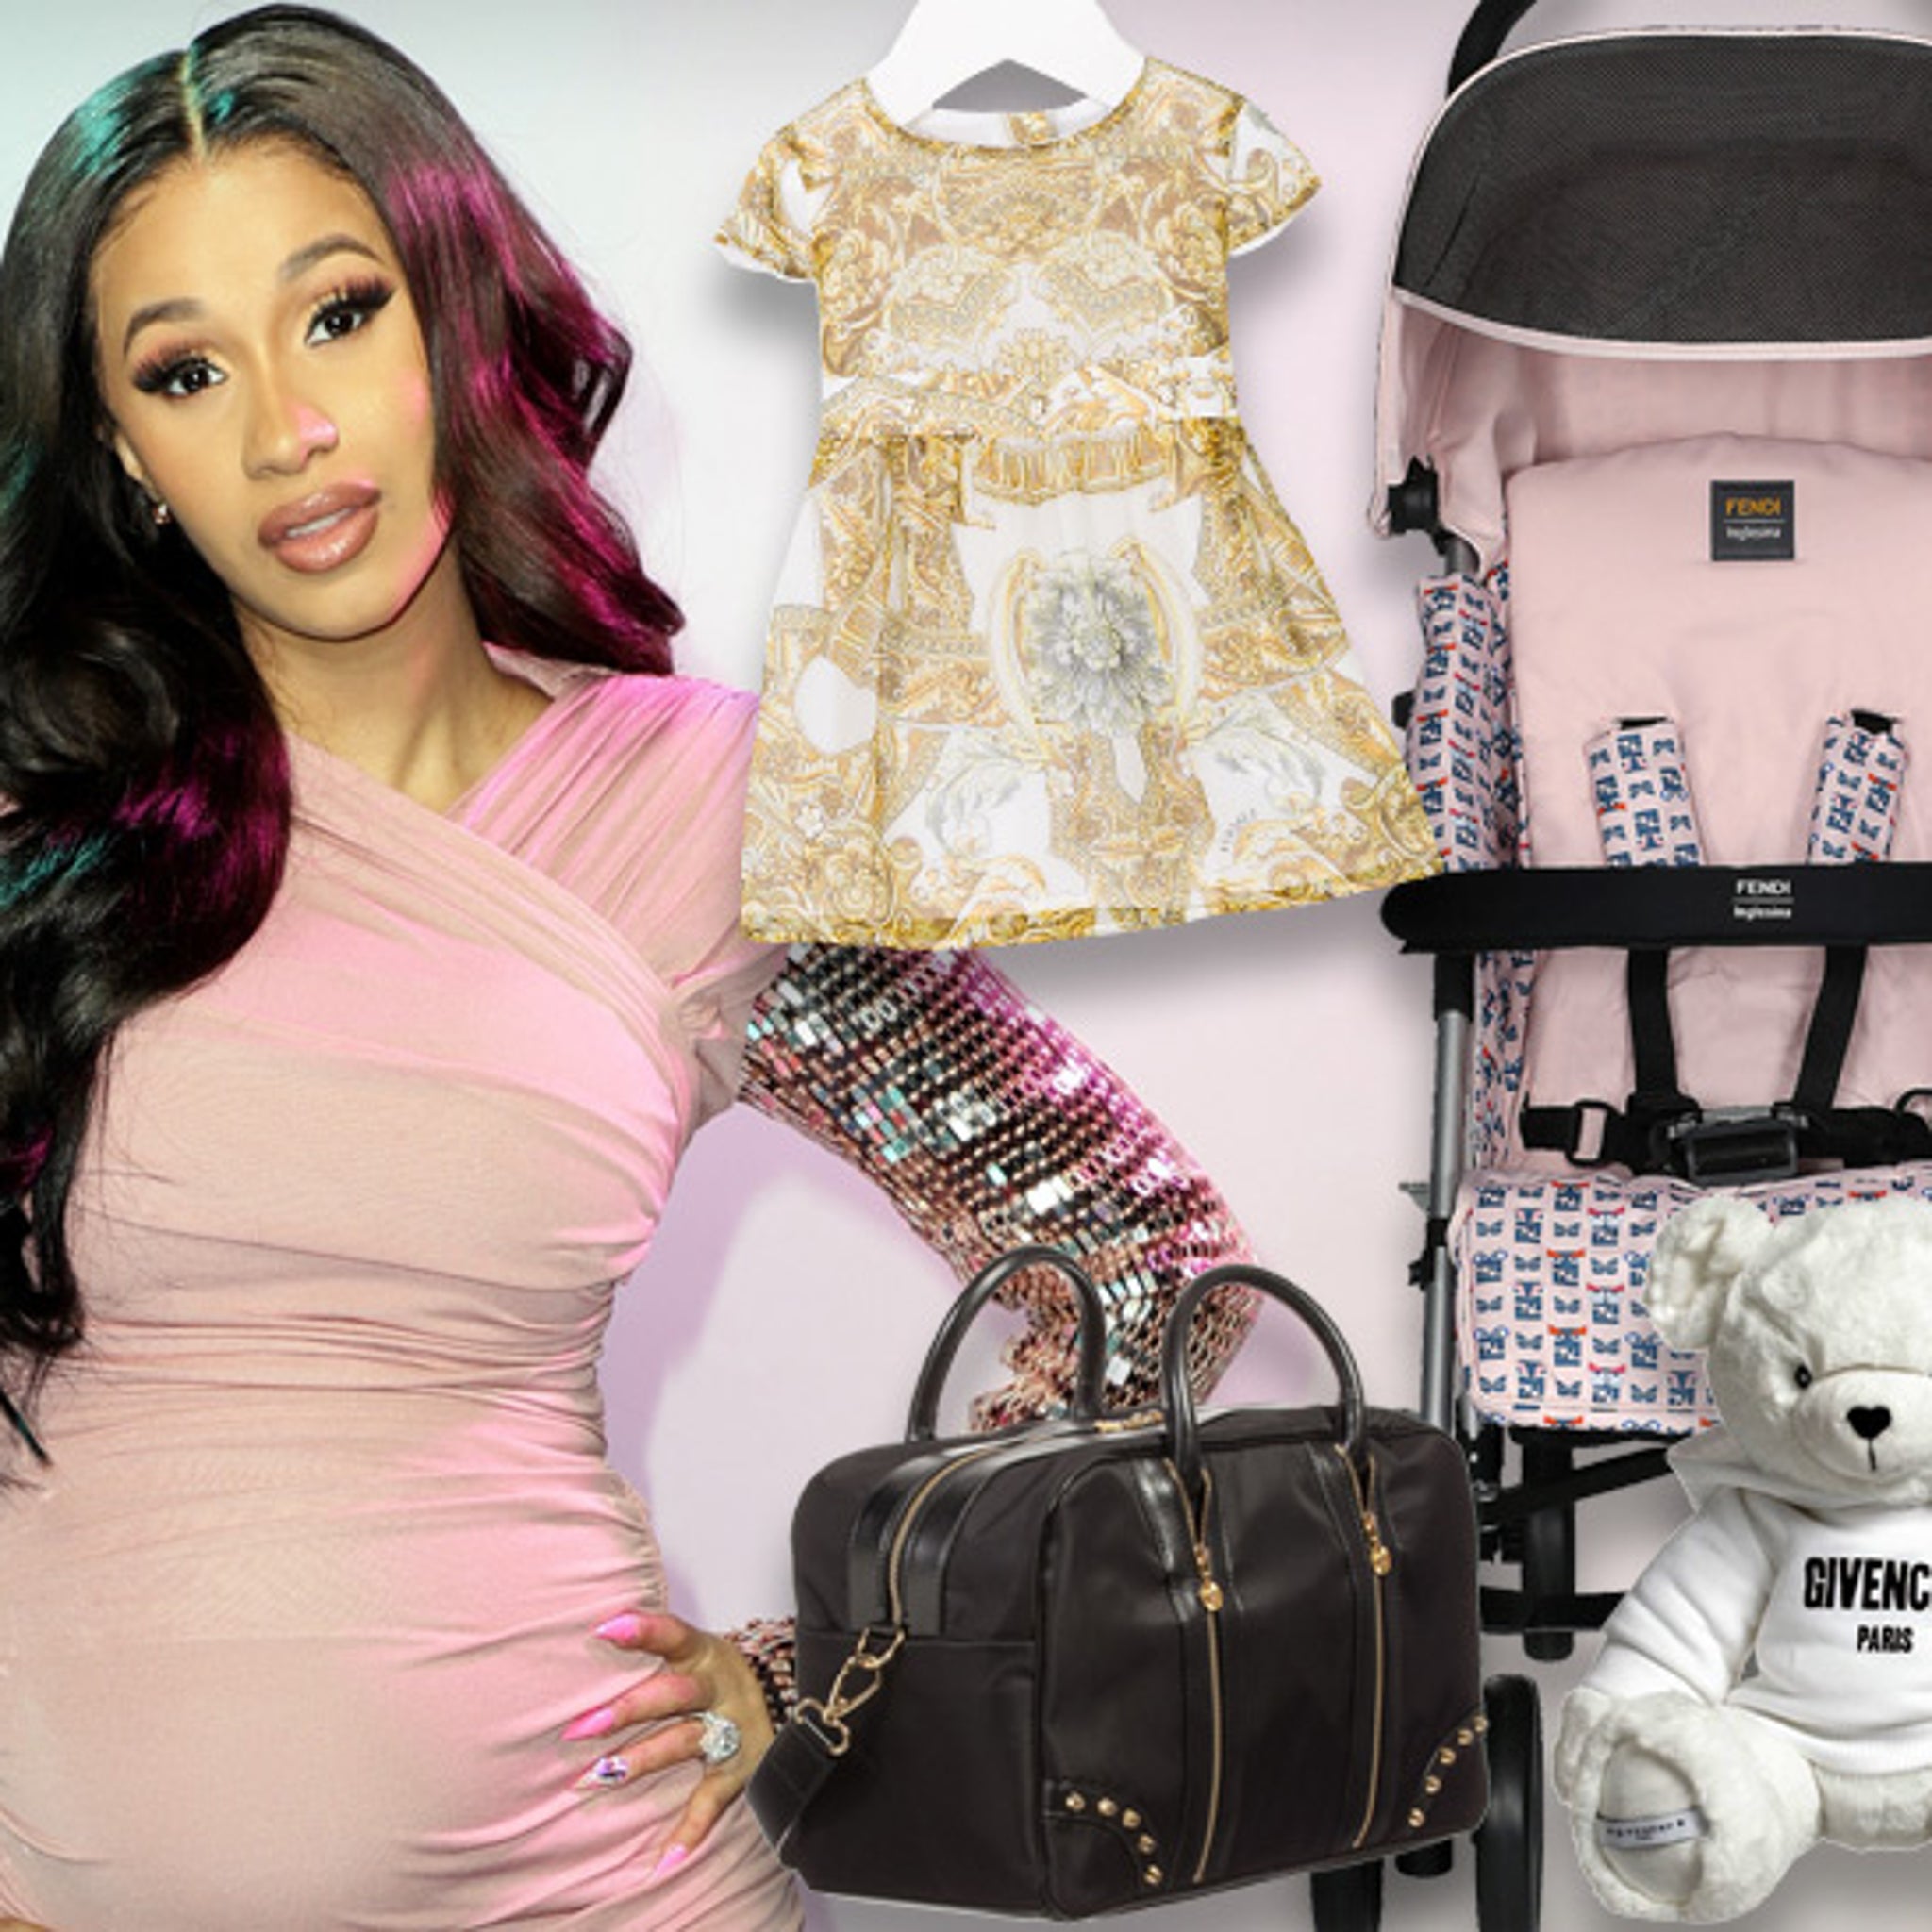 Cardi B's Baby Kulture Rocks Cute Gucci Outfit: Watch – Hollywood Life